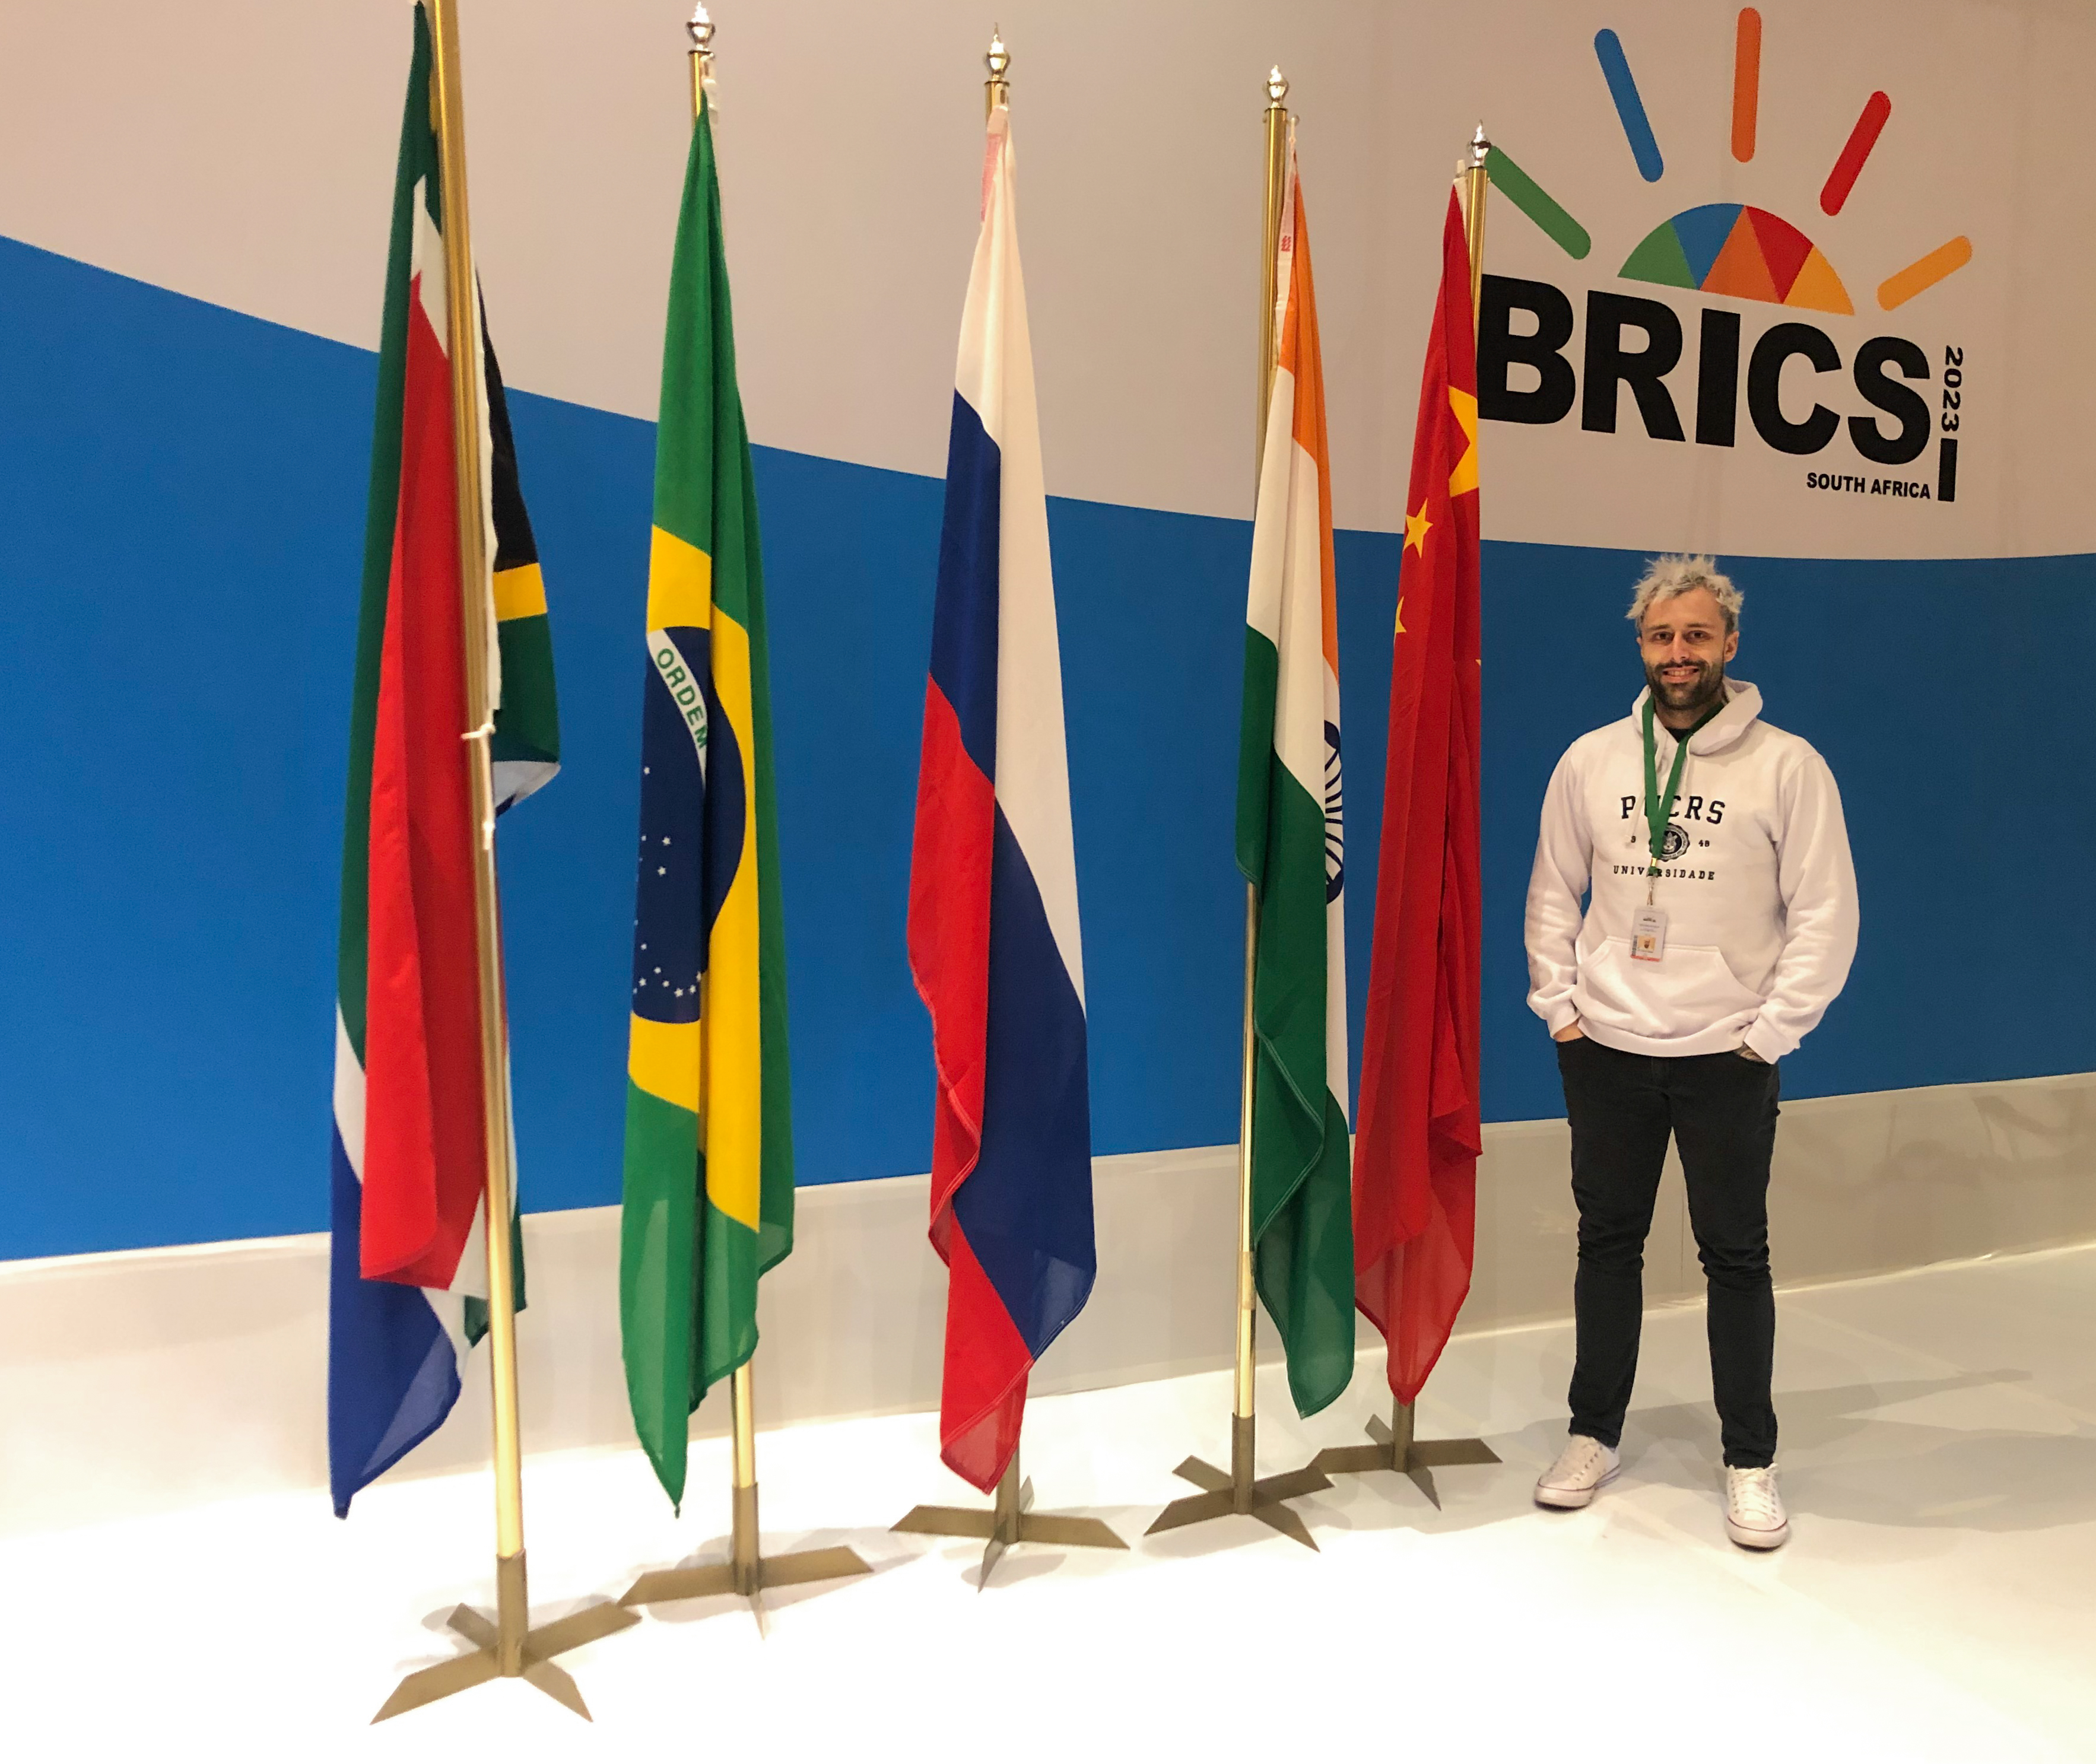 Post-doctoral researcher is a part of the Brazilian delegation in conference of the BRICS